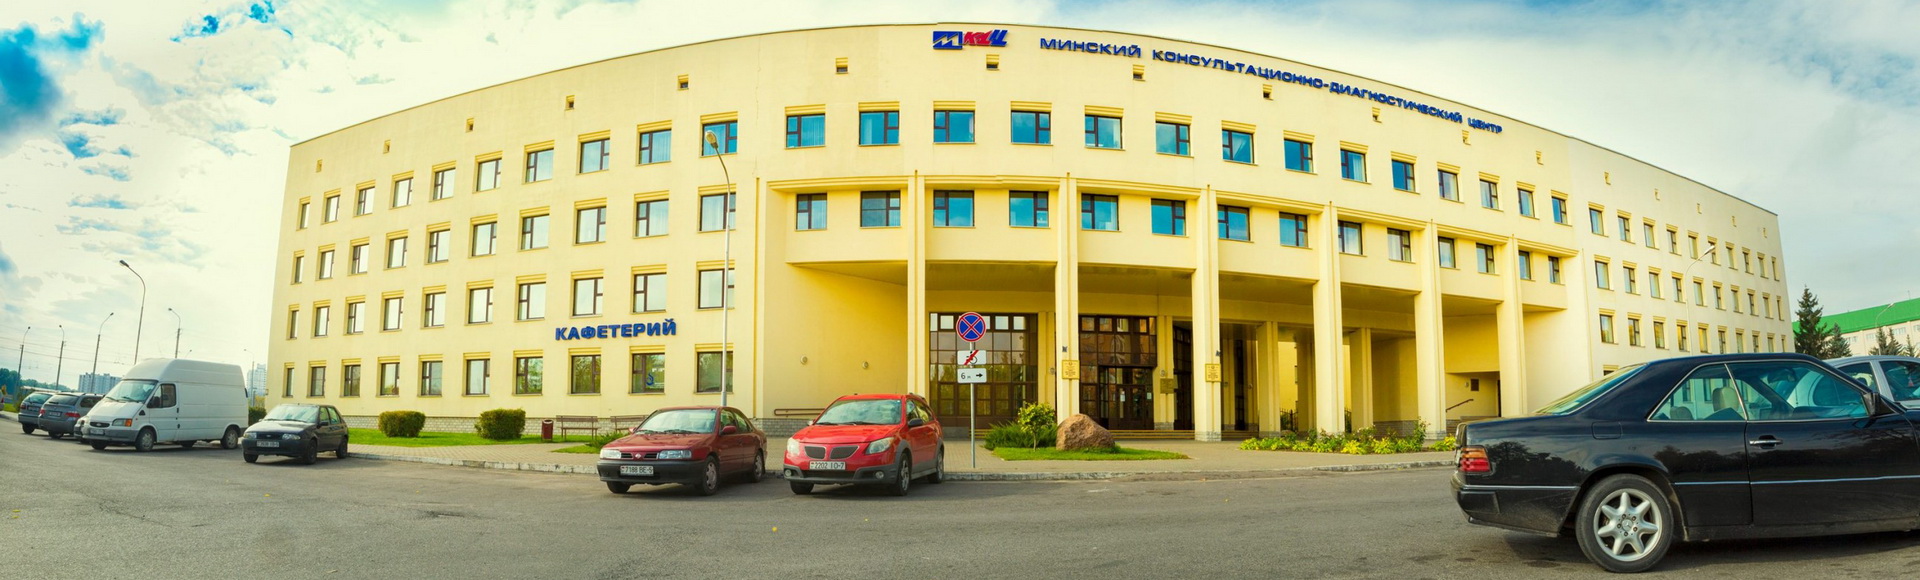 The Minsk Clinical Consultative and Diagnostic Center - Clinics of Belarus